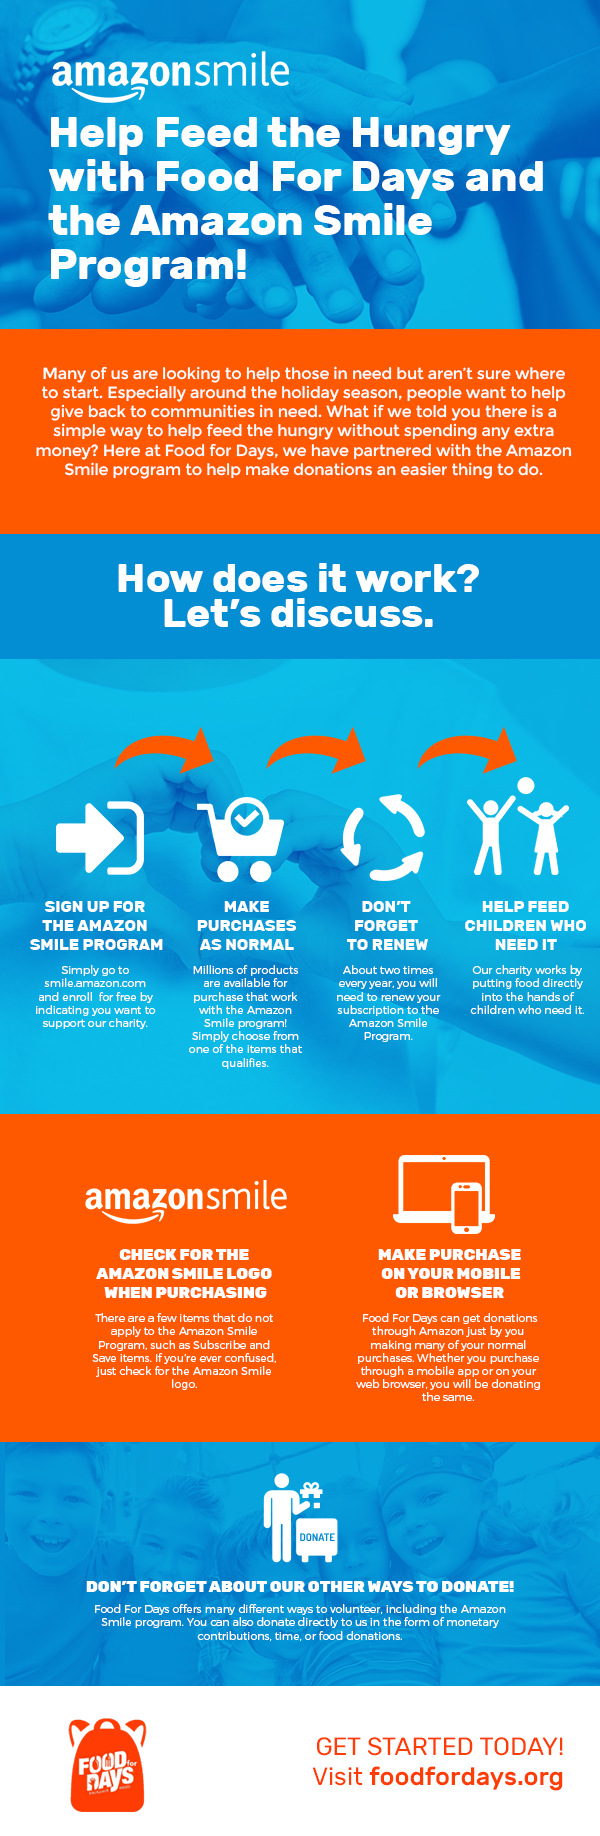 Help Feed the Hungry with Food For Days and the Amazon Smile Program! [infographic]